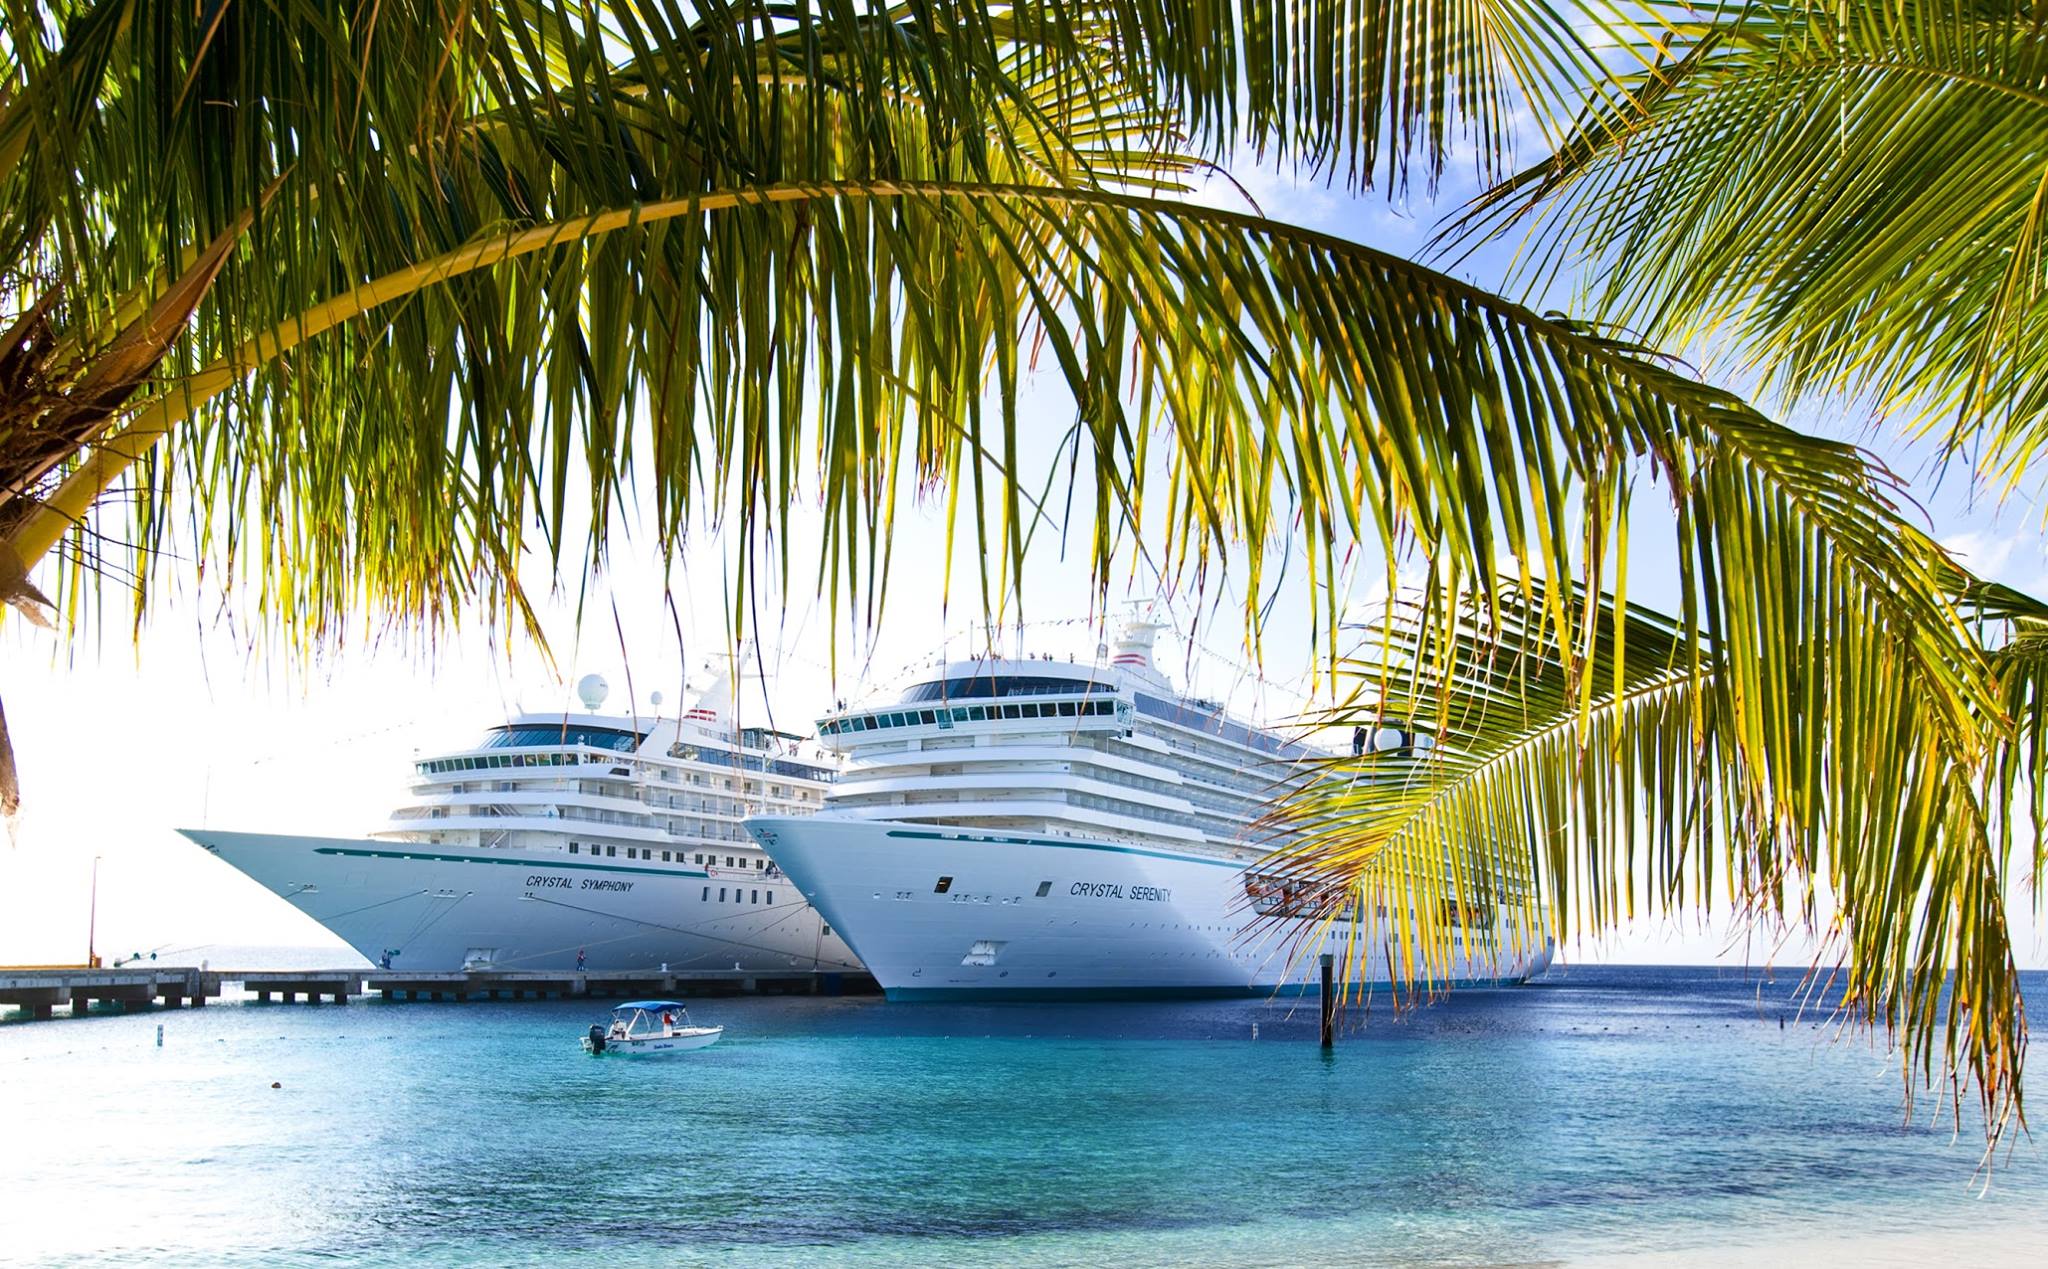 In partnership with The Bahamas, Crystal Cruises seeks to reinvigorate tourism in the region, as the first ocean cruise line to return to sailing in the Americas, with a series of voyages from Nassau and Bimini beginning July 2021.   